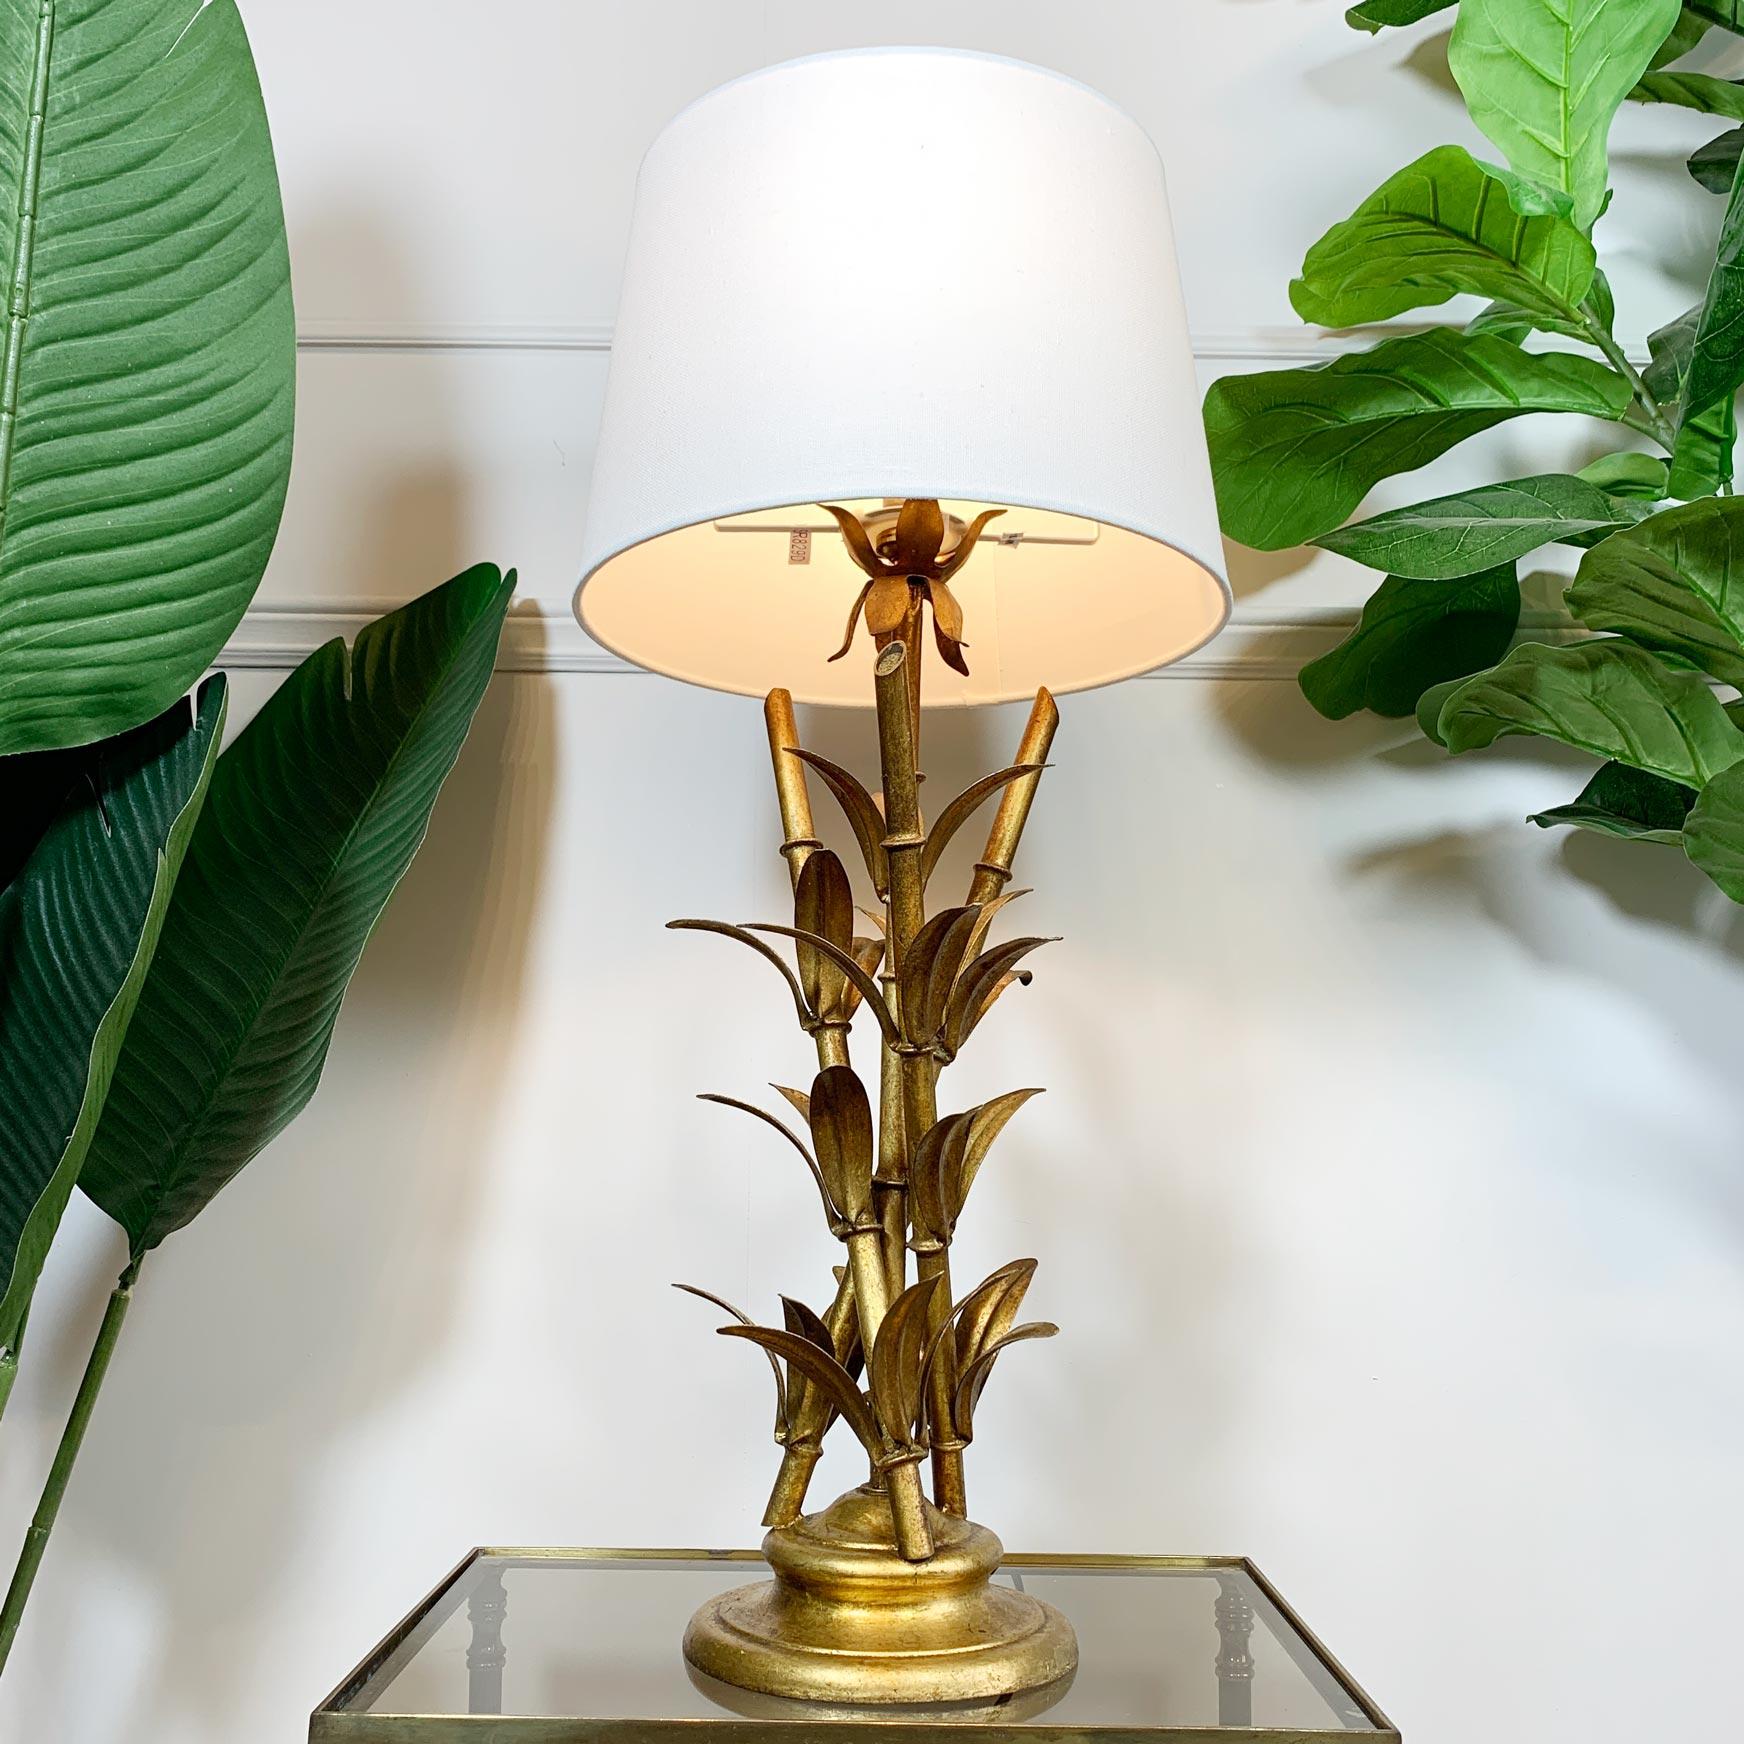 Italian Faux Bamboo Gilt Table Lamp, 1950’s For Sale 1